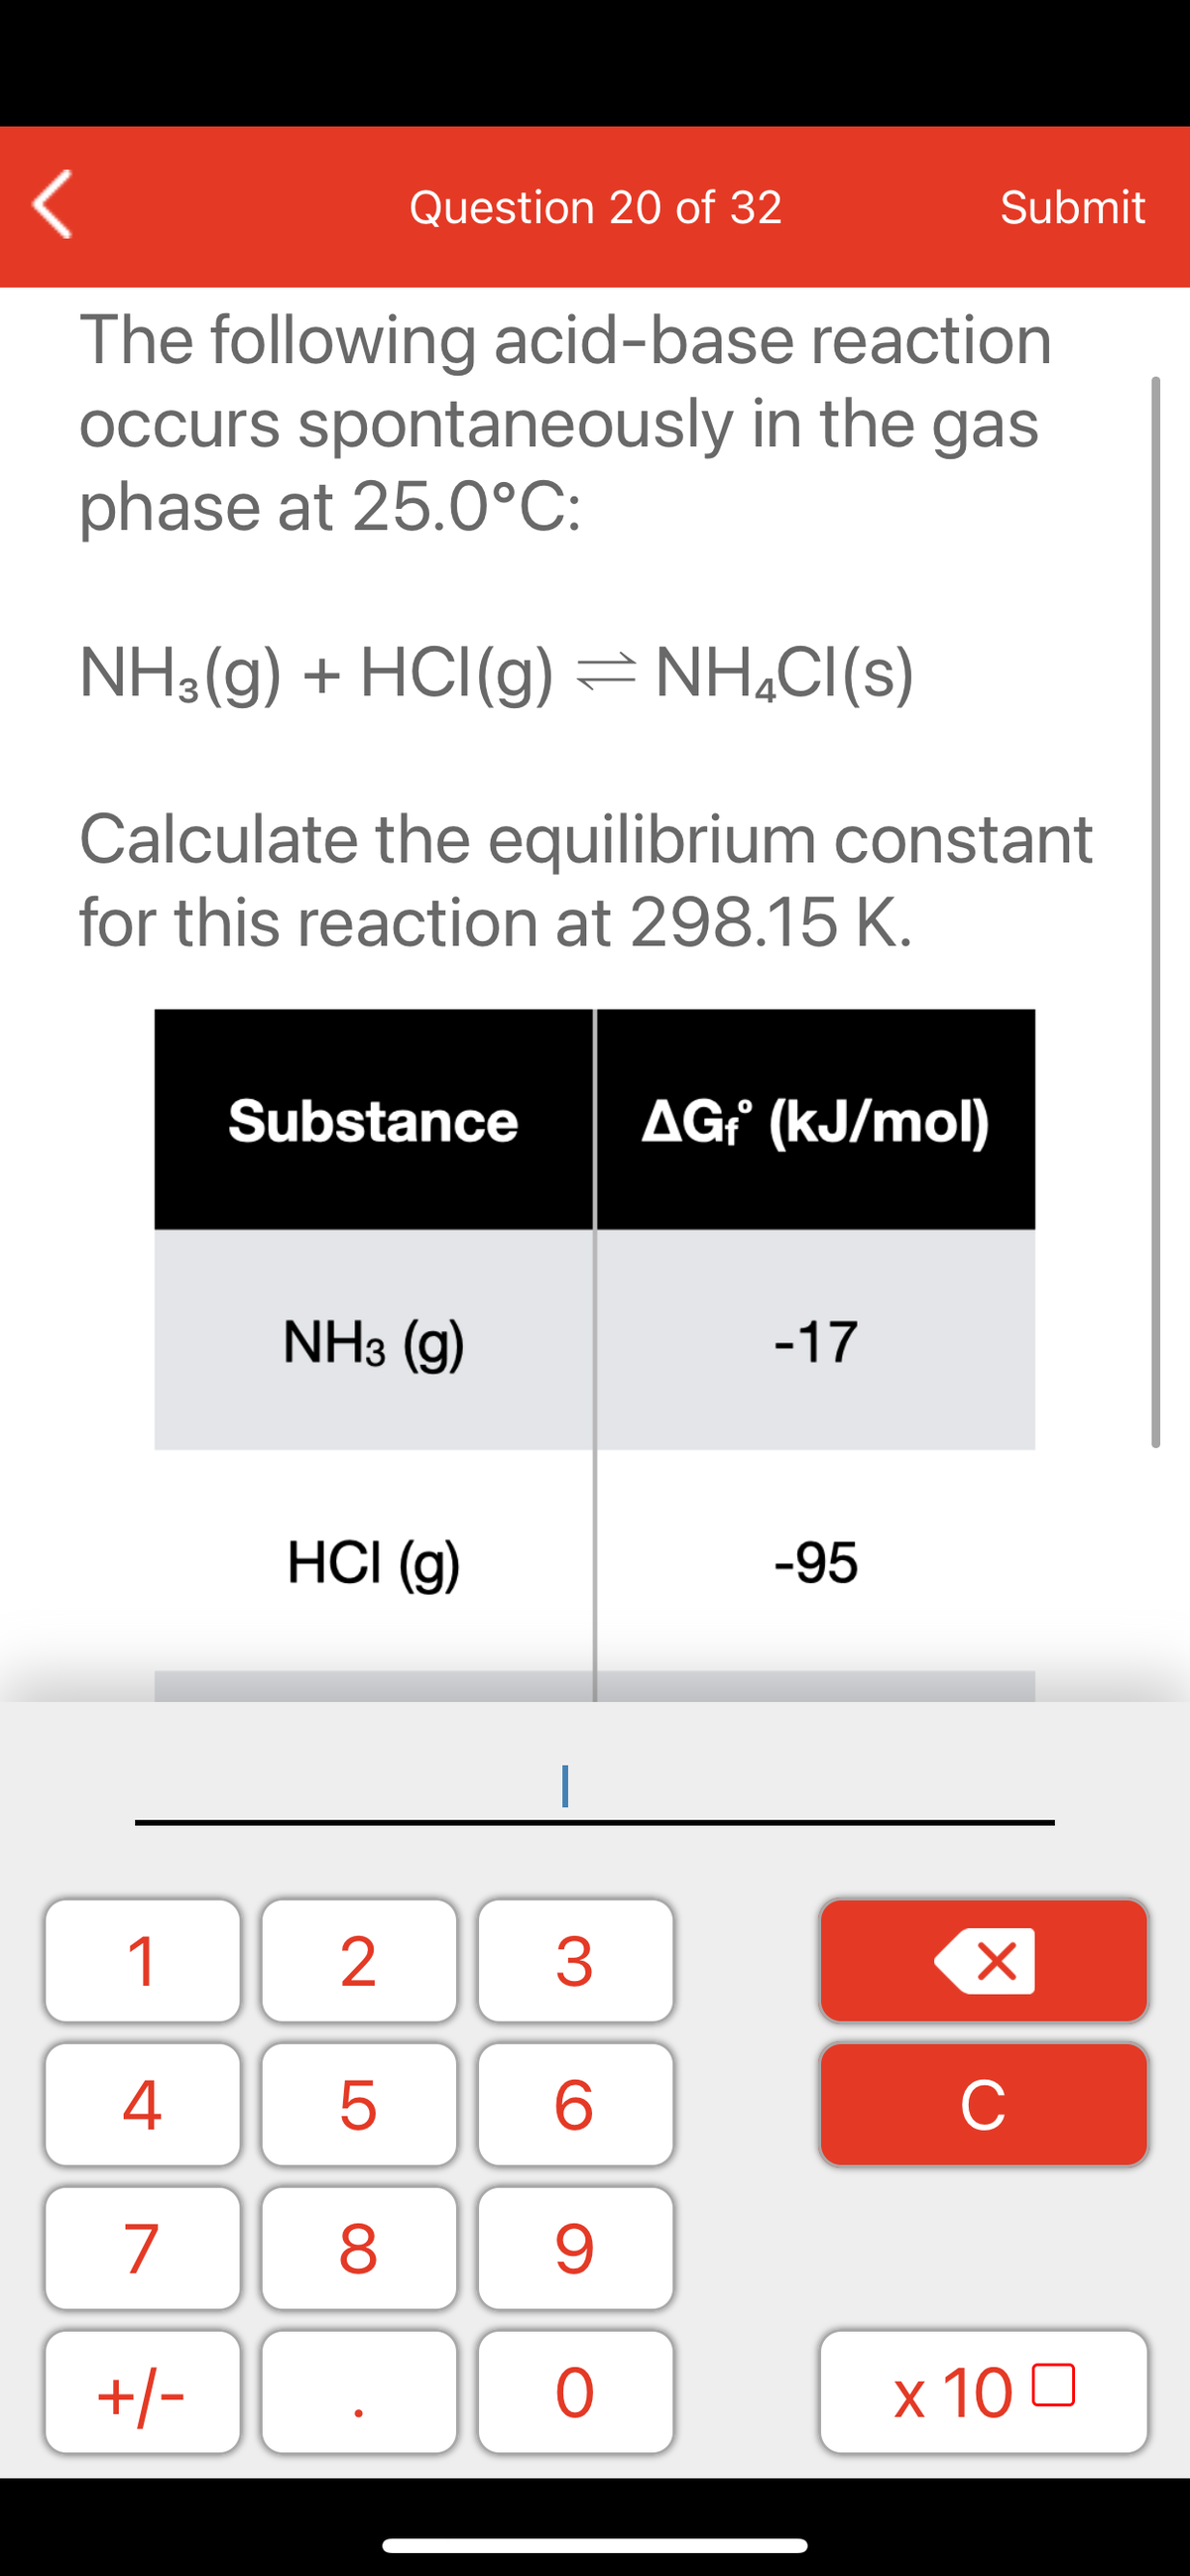 Question 20 of 32
Submit
The following acid-base reaction
occurs spontaneously in the gas
phase at 25.0°C:
NH3(g) + HCI(g) = NH,CI(s)
Calculate the equilibrium constant
for this reaction at 298.15 K.
Substance
AG² (kJ/mol)
NH3 (g)
-17
HCI (g)
-95
1
2
3
C
7
9.
+/-
x 10 0
LO
00
